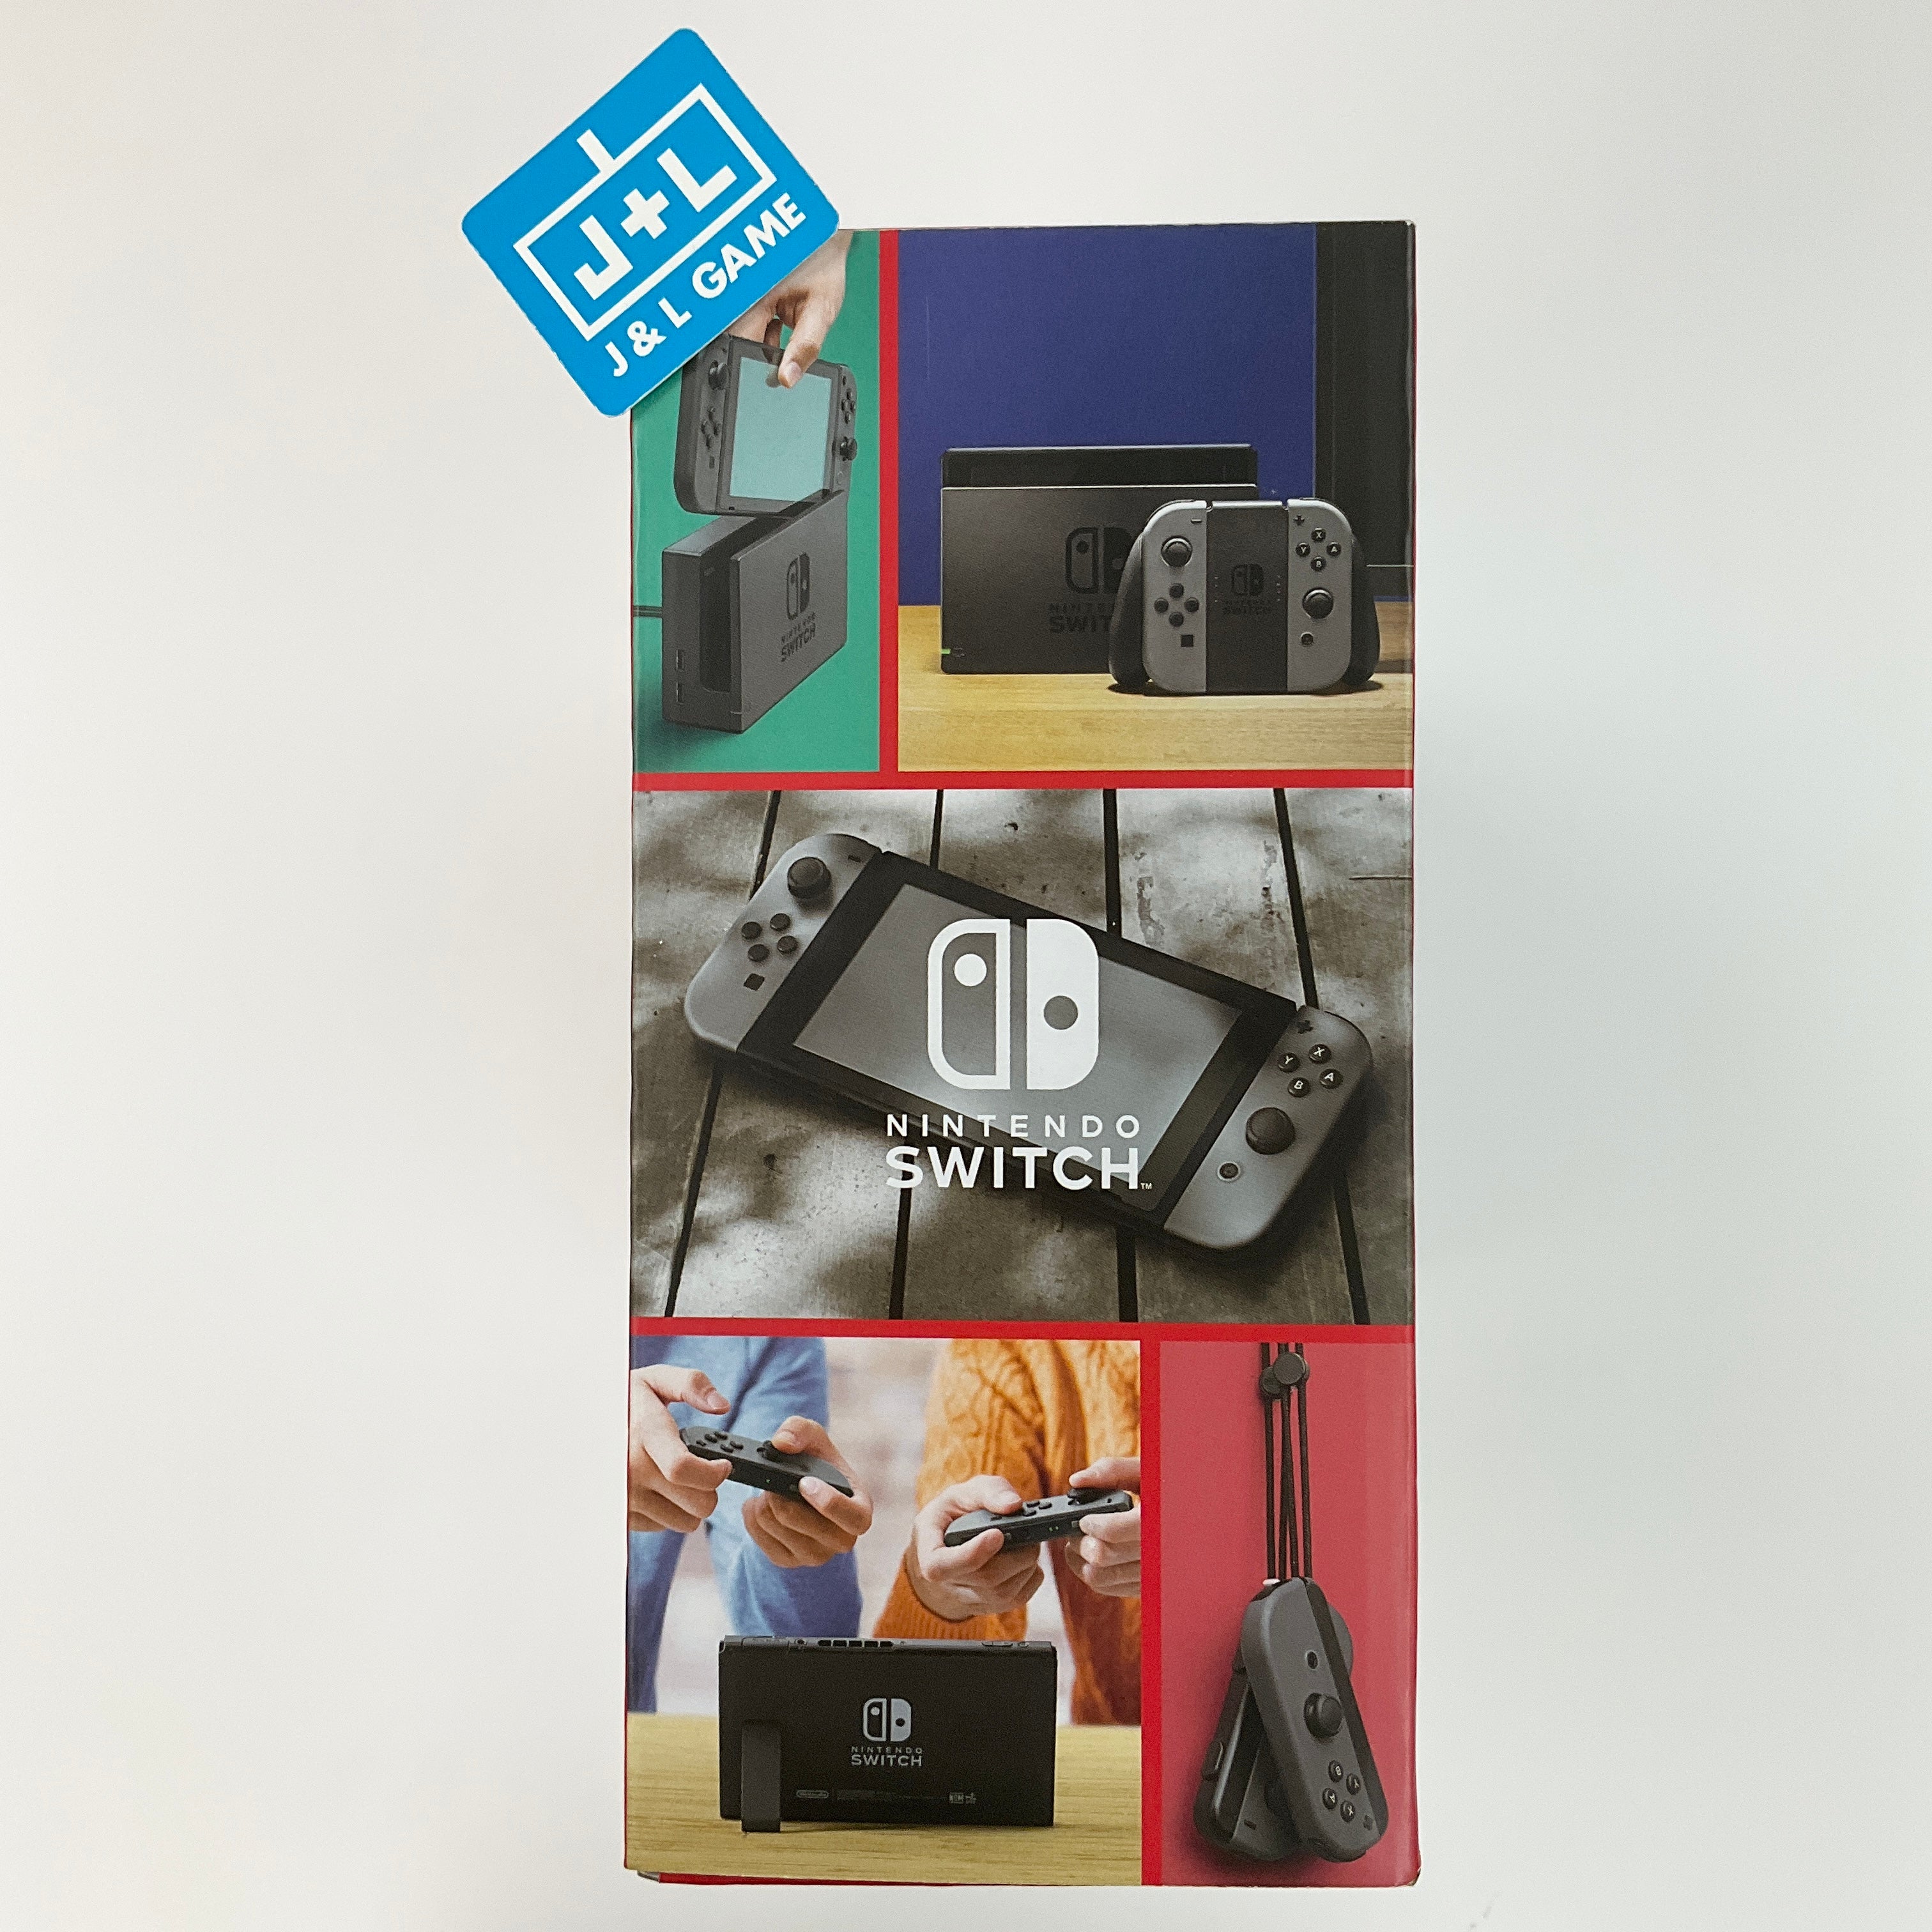 Nintendo Switch Console with Gray Joy-Con (L-R) - (NSW) Nintendo Switch Consoles Nintendo   